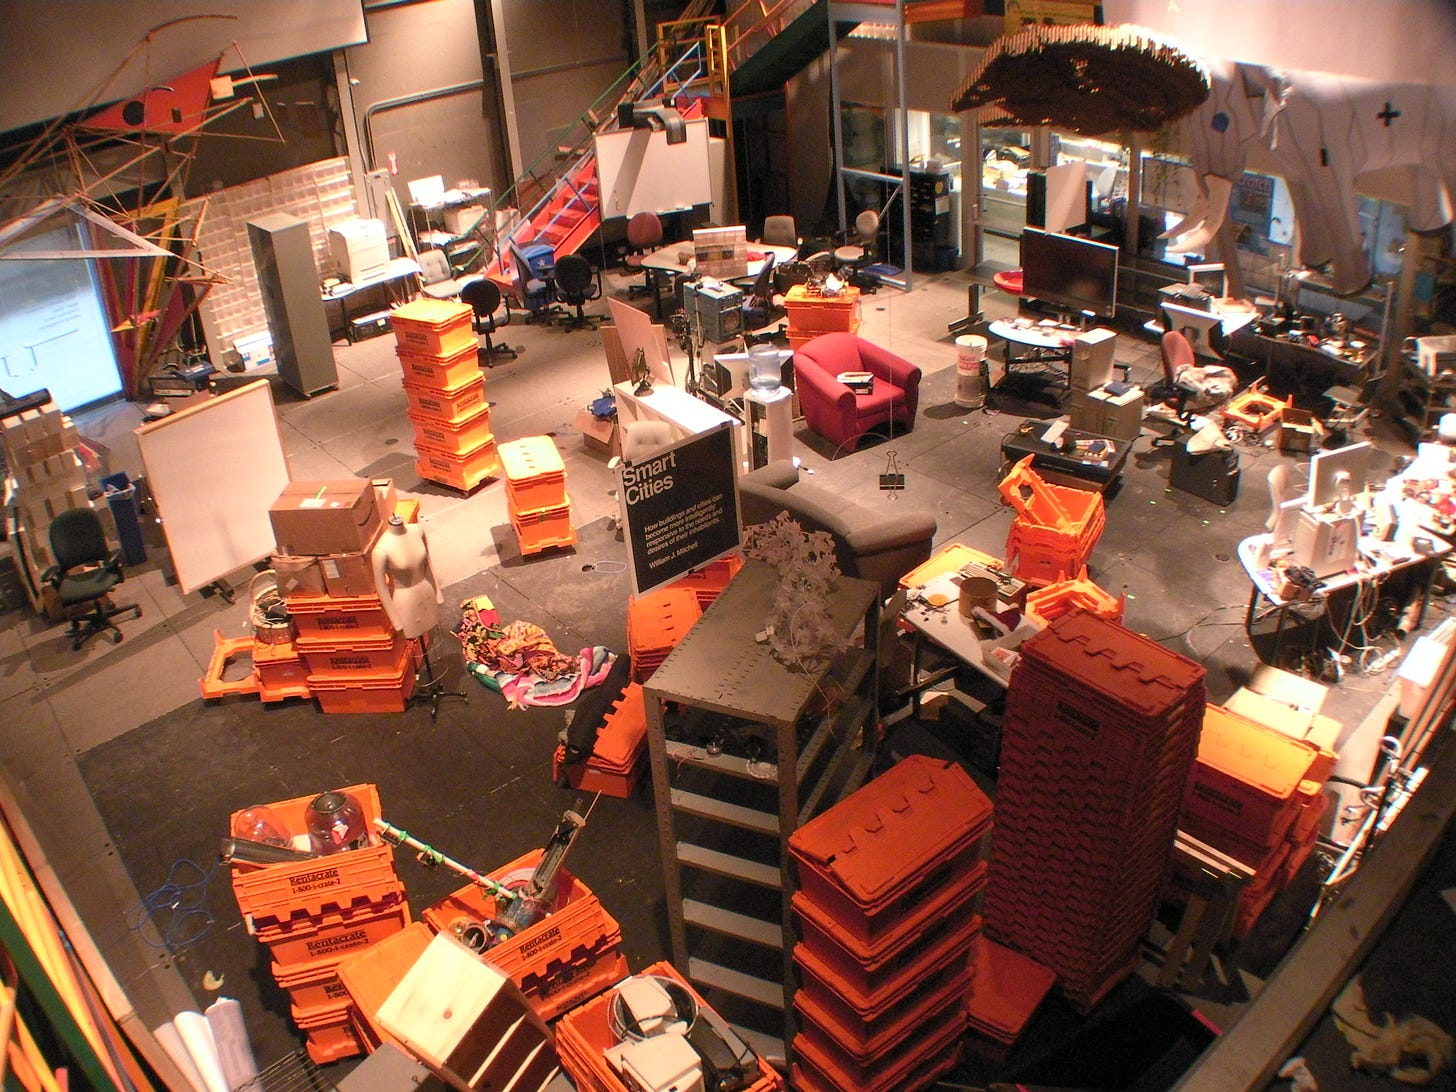 An aerial shot of the Smart Cities lab on a moving day to its current site. Orange crates, lab benches, storage unite, and odd scraps of furniture lay in disarray in an industrial space.